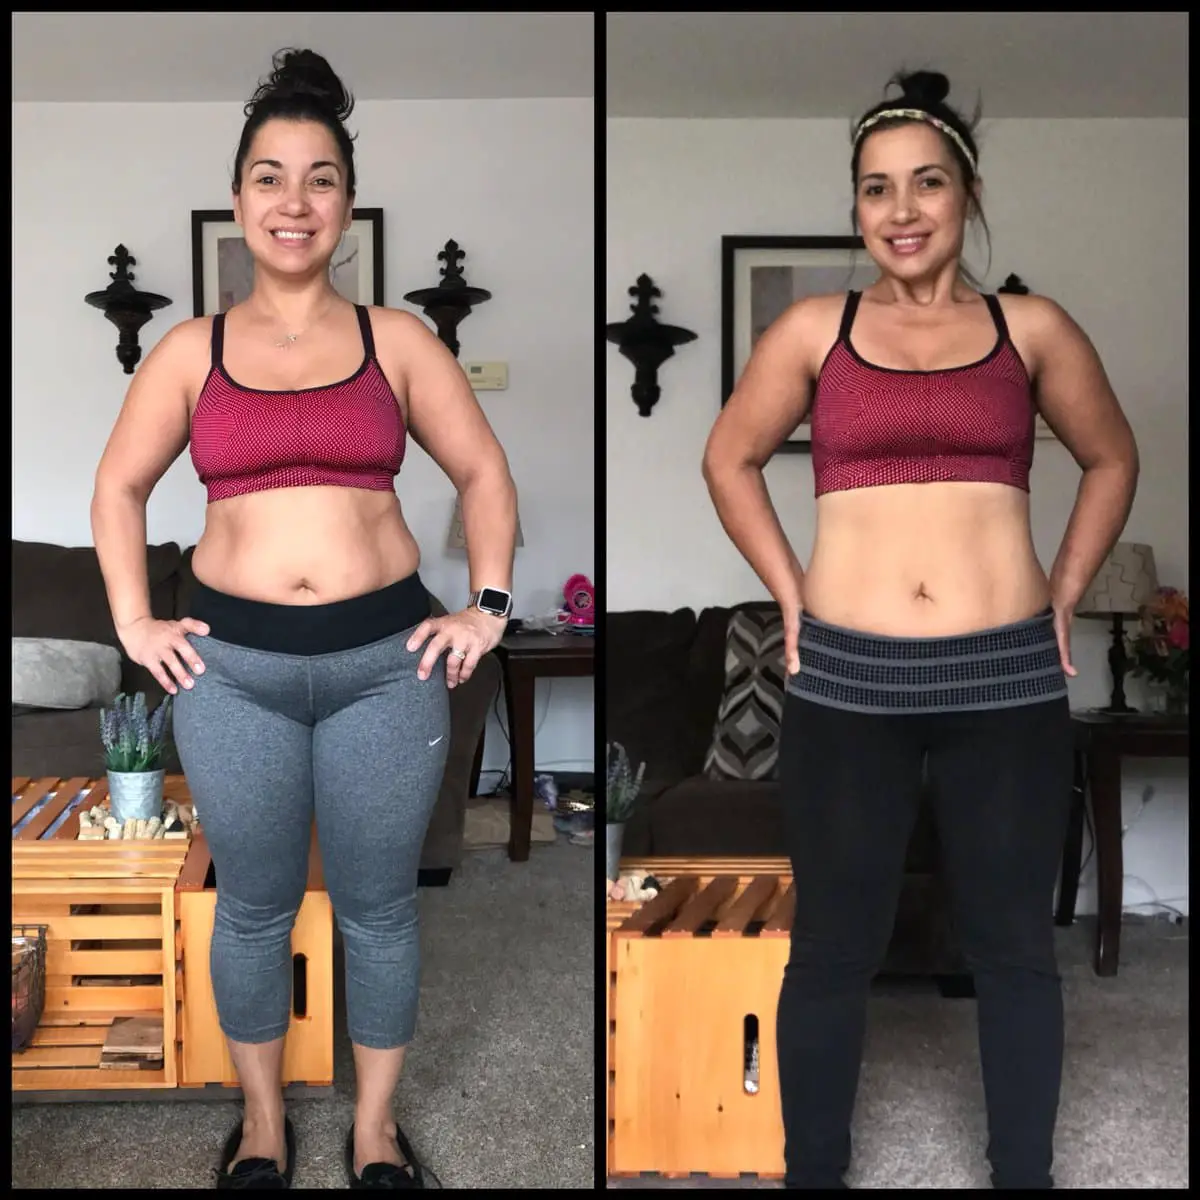 Miriam Martin on Twitter: " The results of keto in 10 short weeks. #keto ...